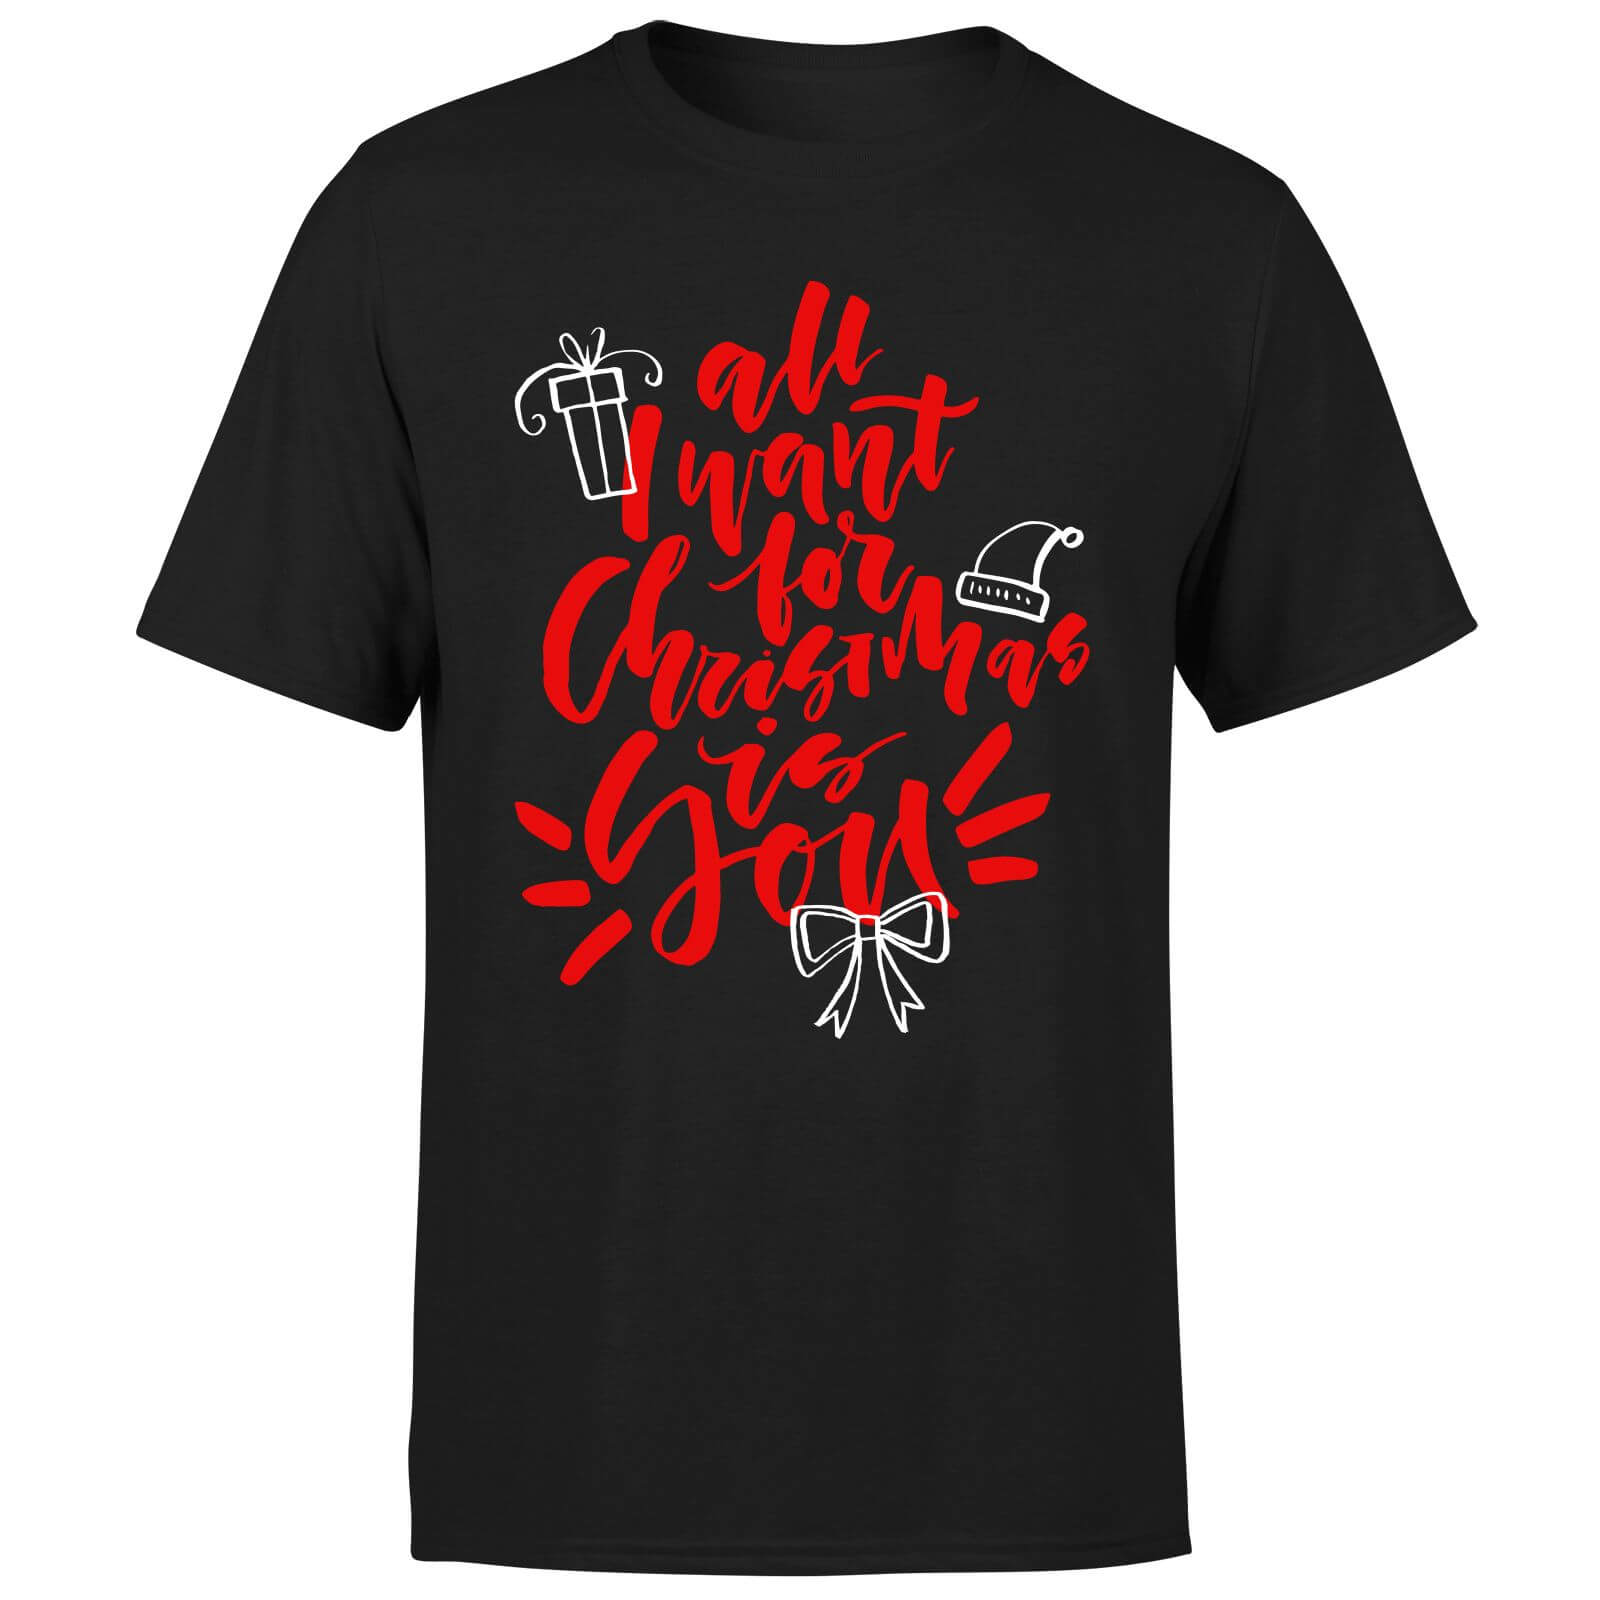 All i want for Christmas T-Shirt - Black - S - Black